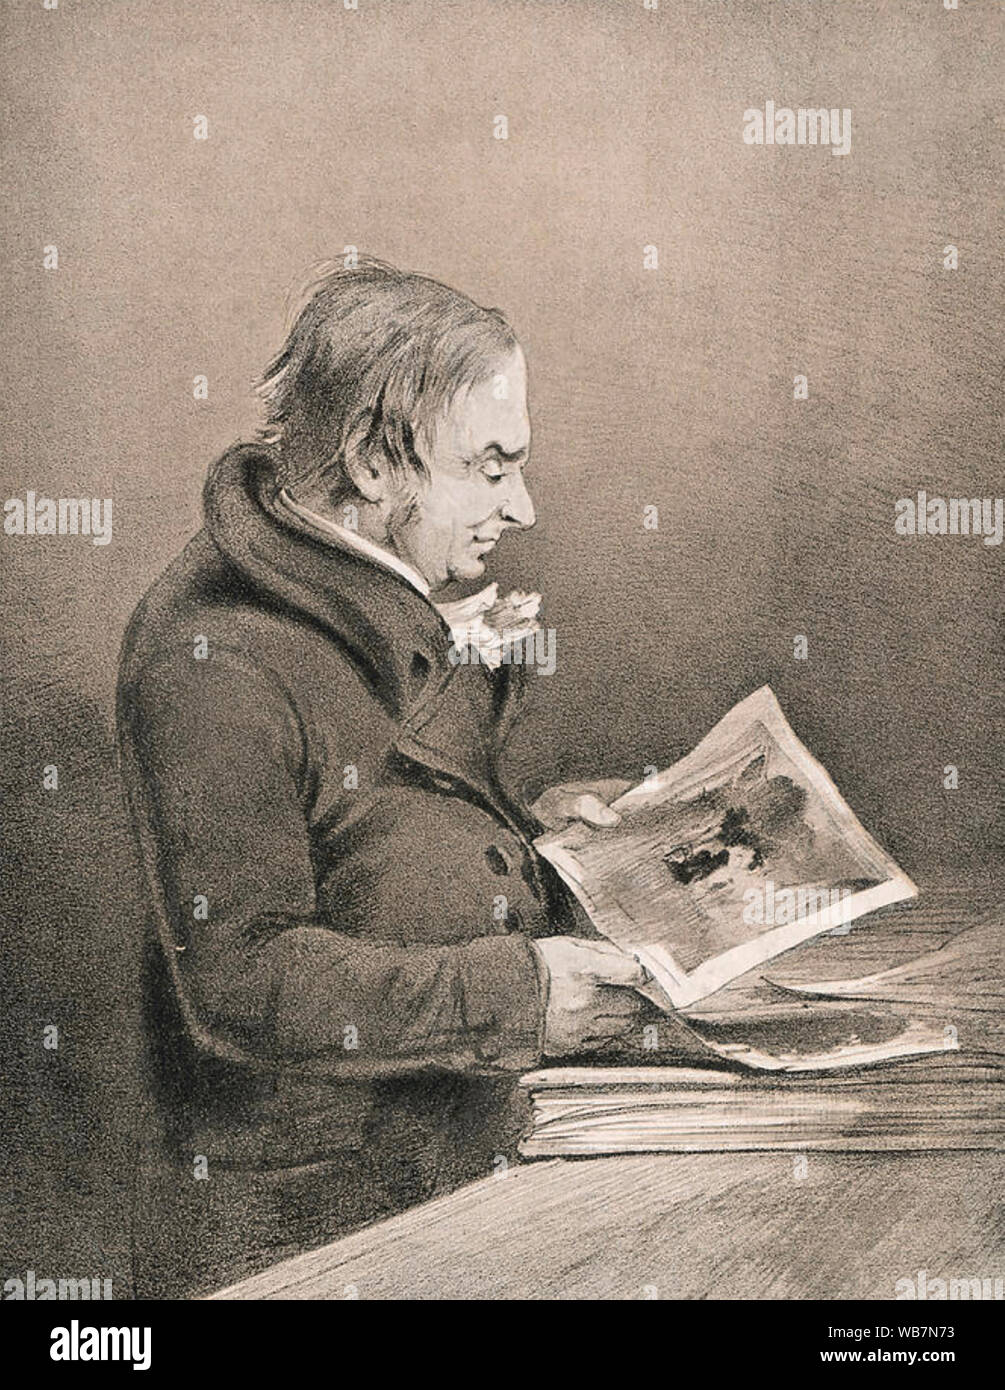 J.M.W. TURNER (1775-1851) English romantic artist checking some of his sketches about §1840 Stock Photo